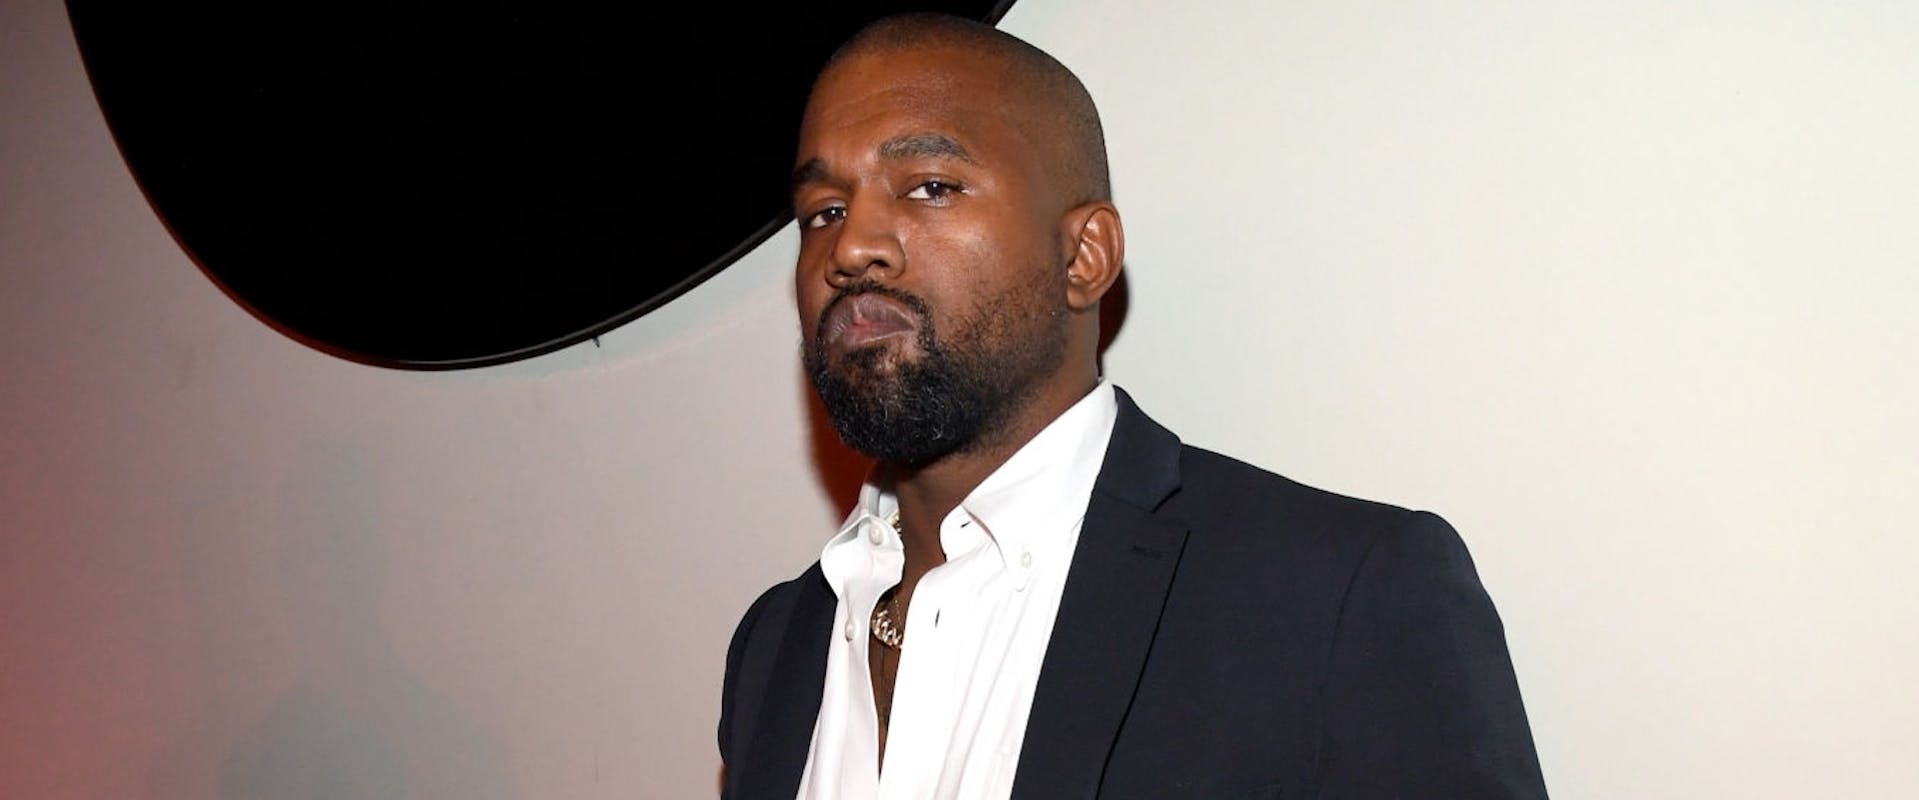 Kanye West attends Sean Combs 50th Birthday Bash presented by Ciroc Vodka on December 14, 2019 in Los Angeles, California. 